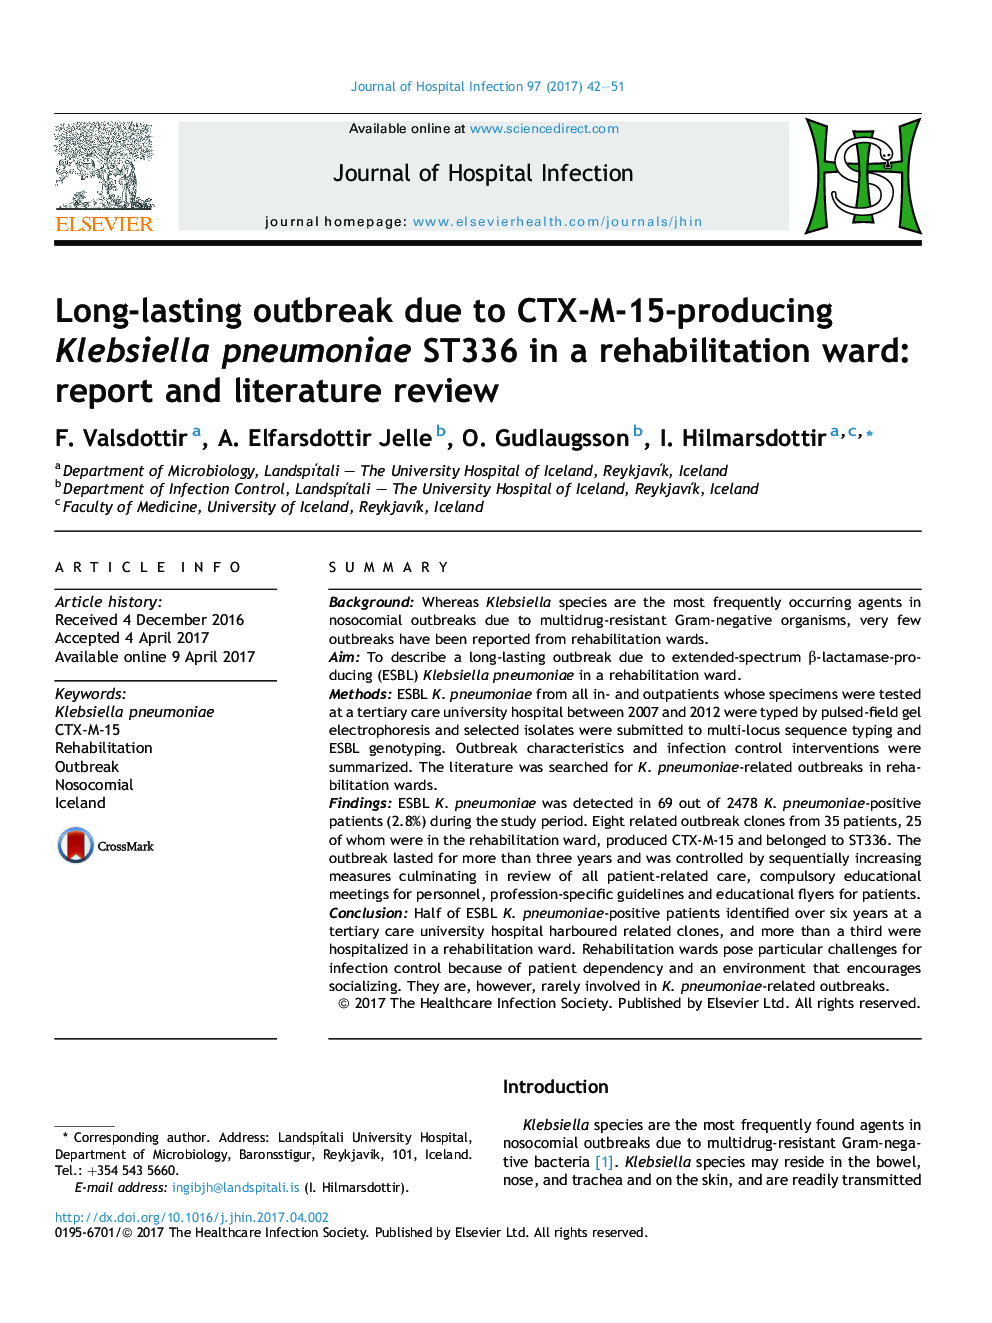 Long-lasting outbreak due to CTX-M-15-producing Klebsiella pneumoniae ST336 in a rehabilitation ward: report and literature review